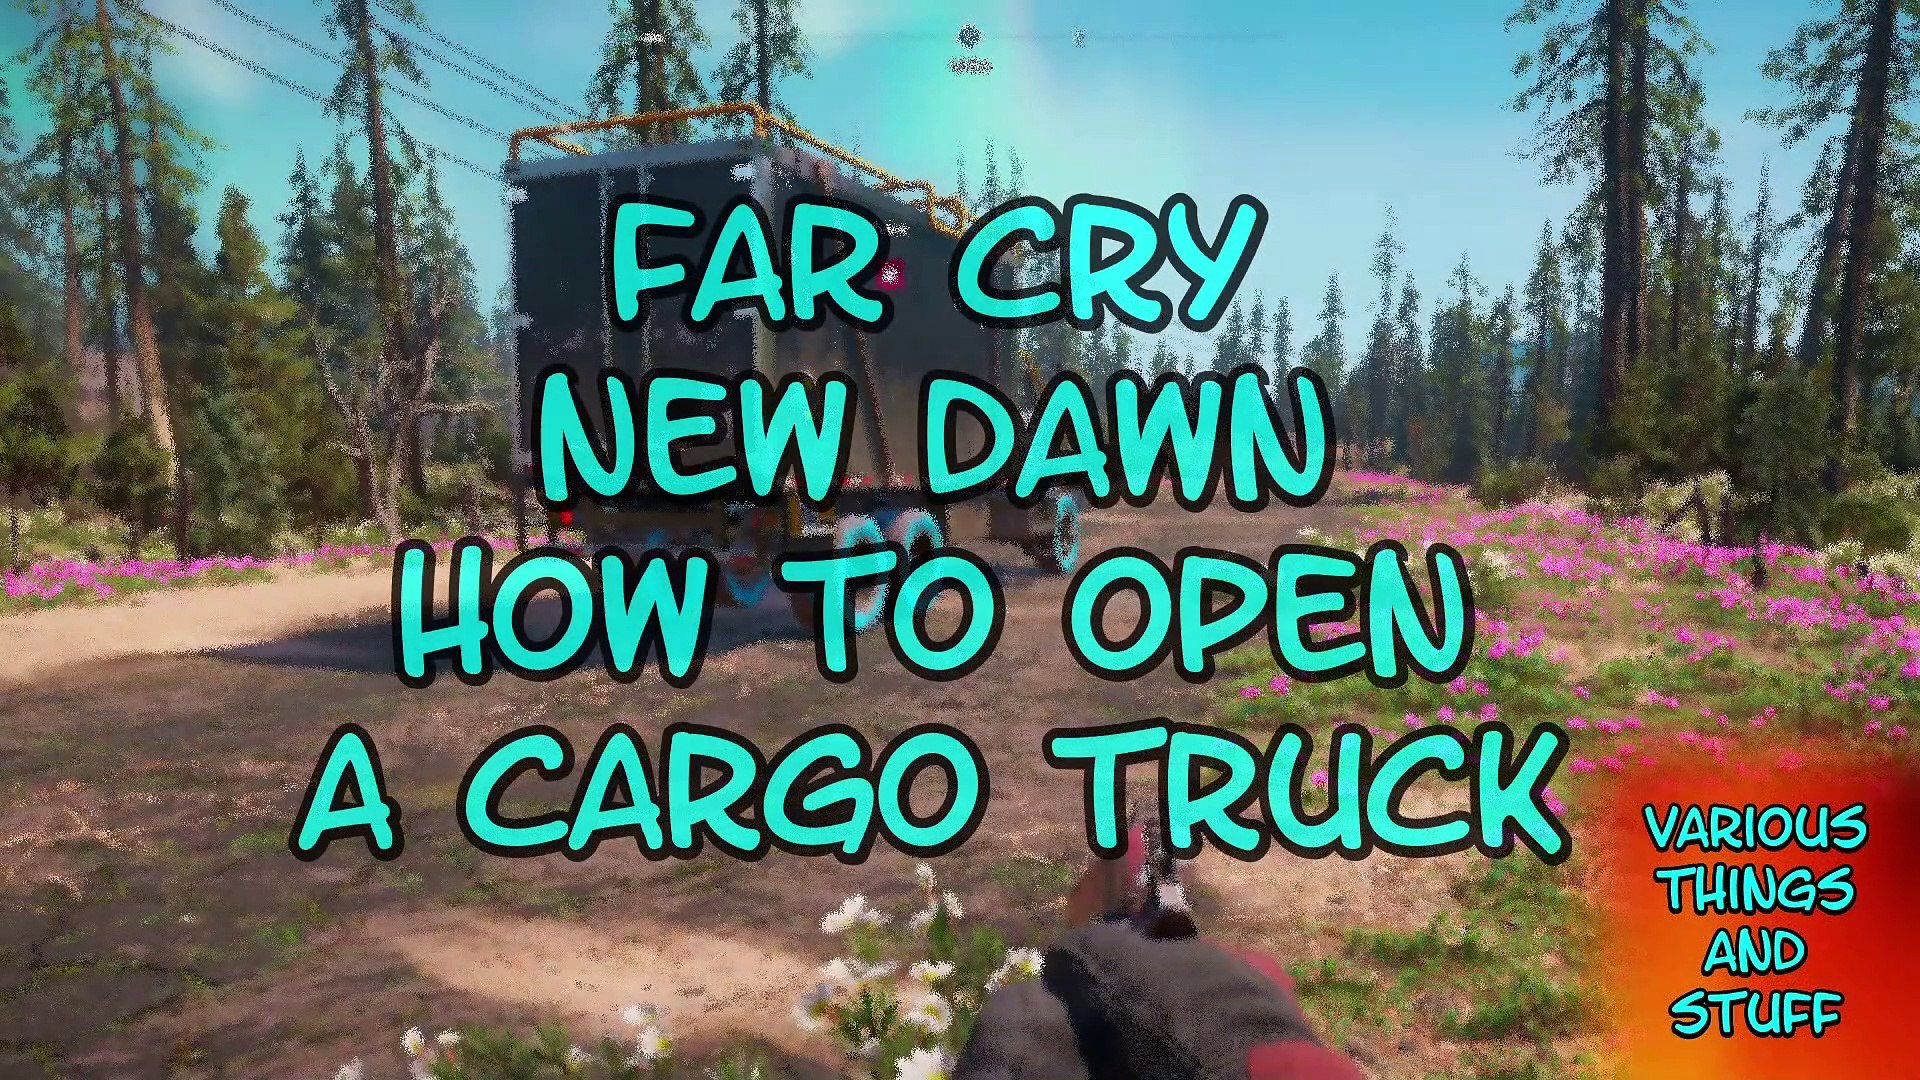 Far Cry New Dawn How to Loot a Cargo Truck - video Dailymotion